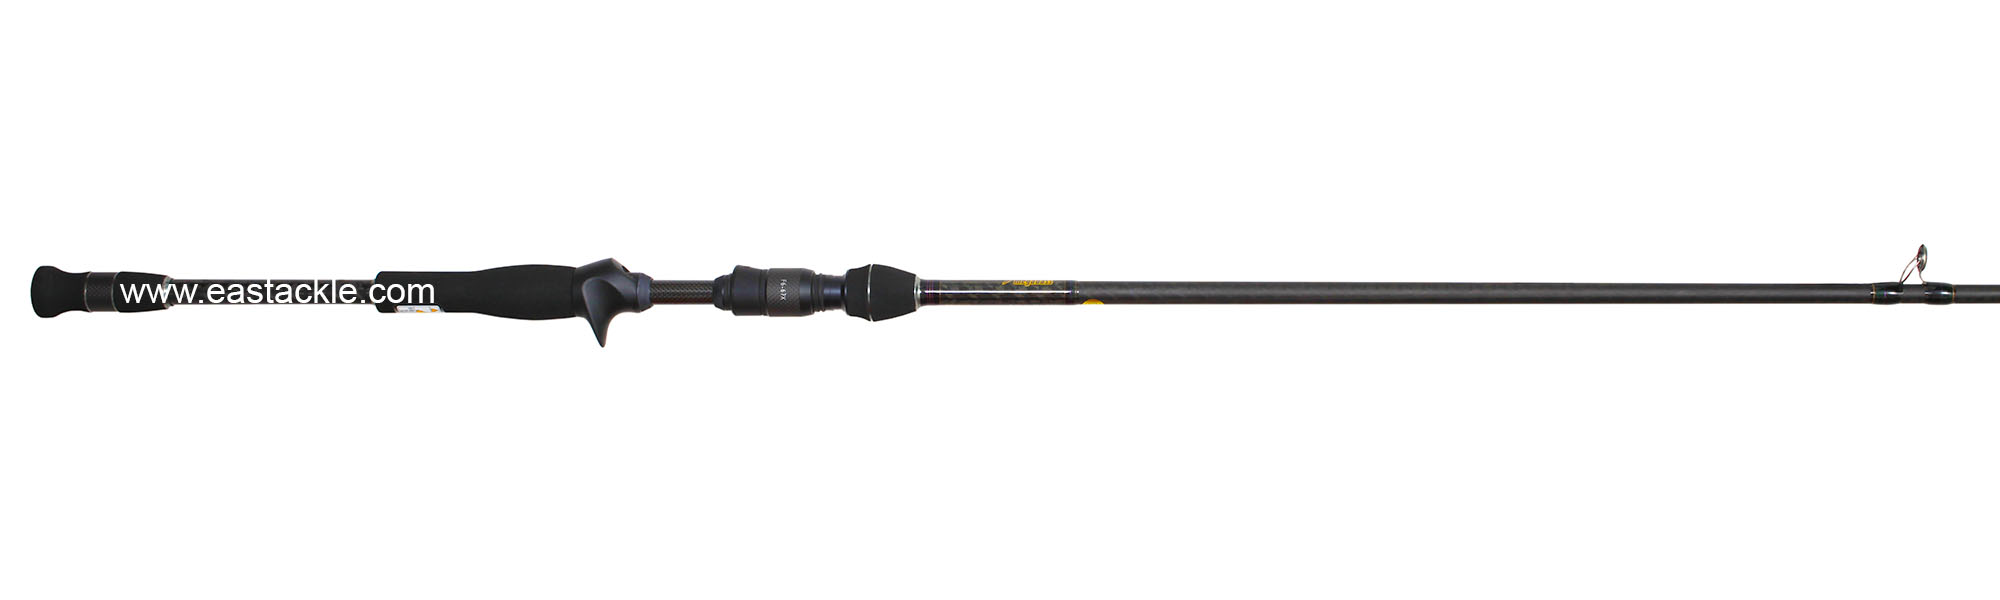 Megabass - Destroyer Phase 3 - F6-67X - G-AX - Bait Casting Rod - Butt to Stripper Guide (Side View) | Eastackle